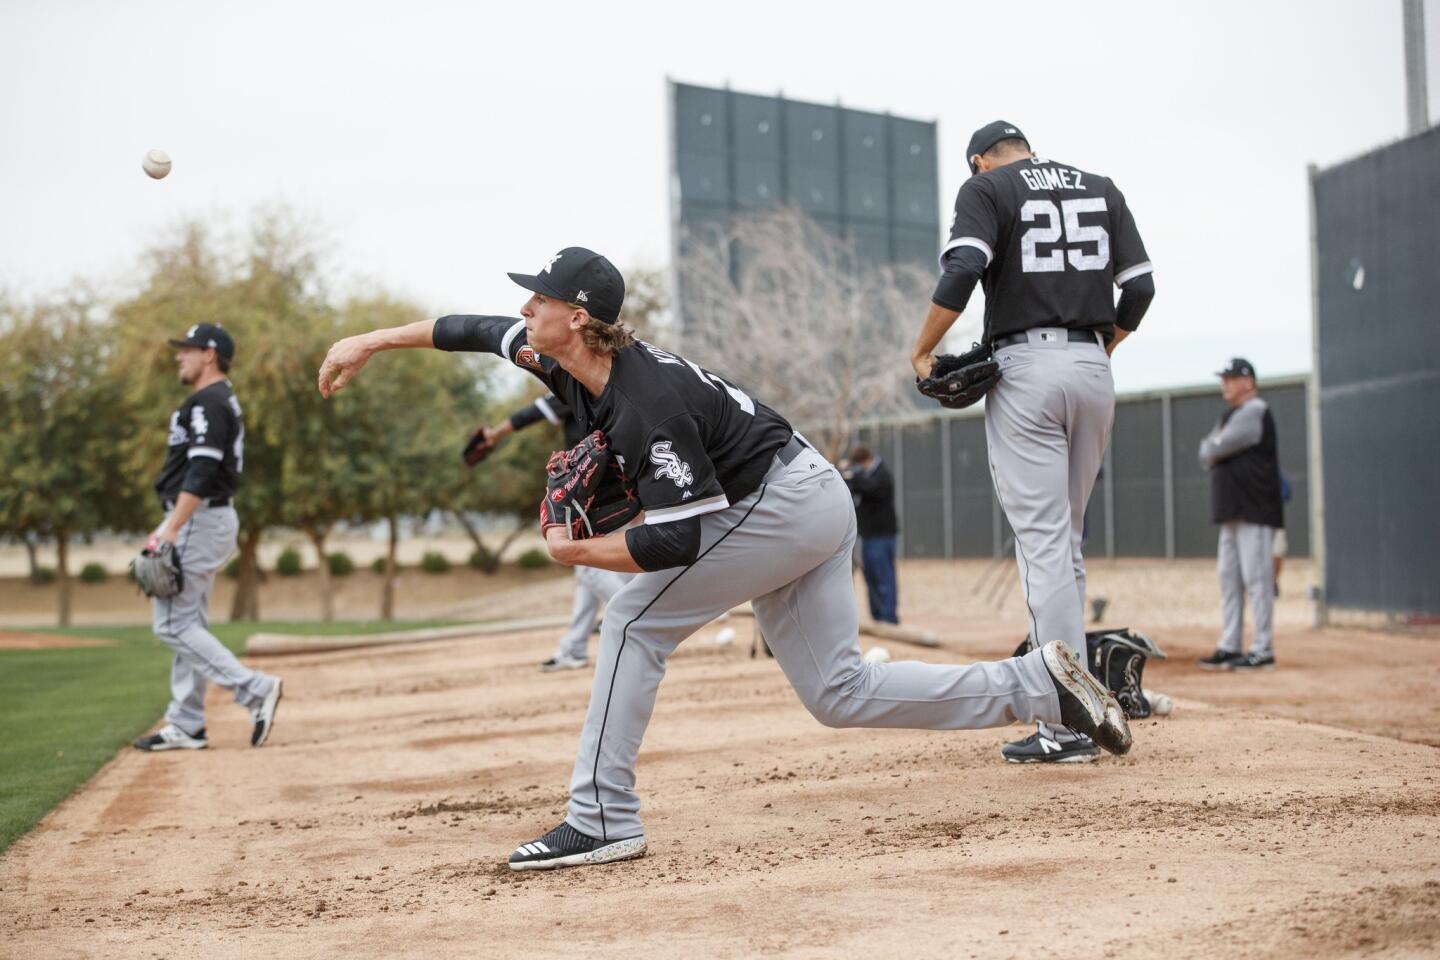 Michael Kopech pitches in the bullpen during White Sox spring training at Camelback Ranch on Feb. 16, 2018, in Glendale, Ariz.